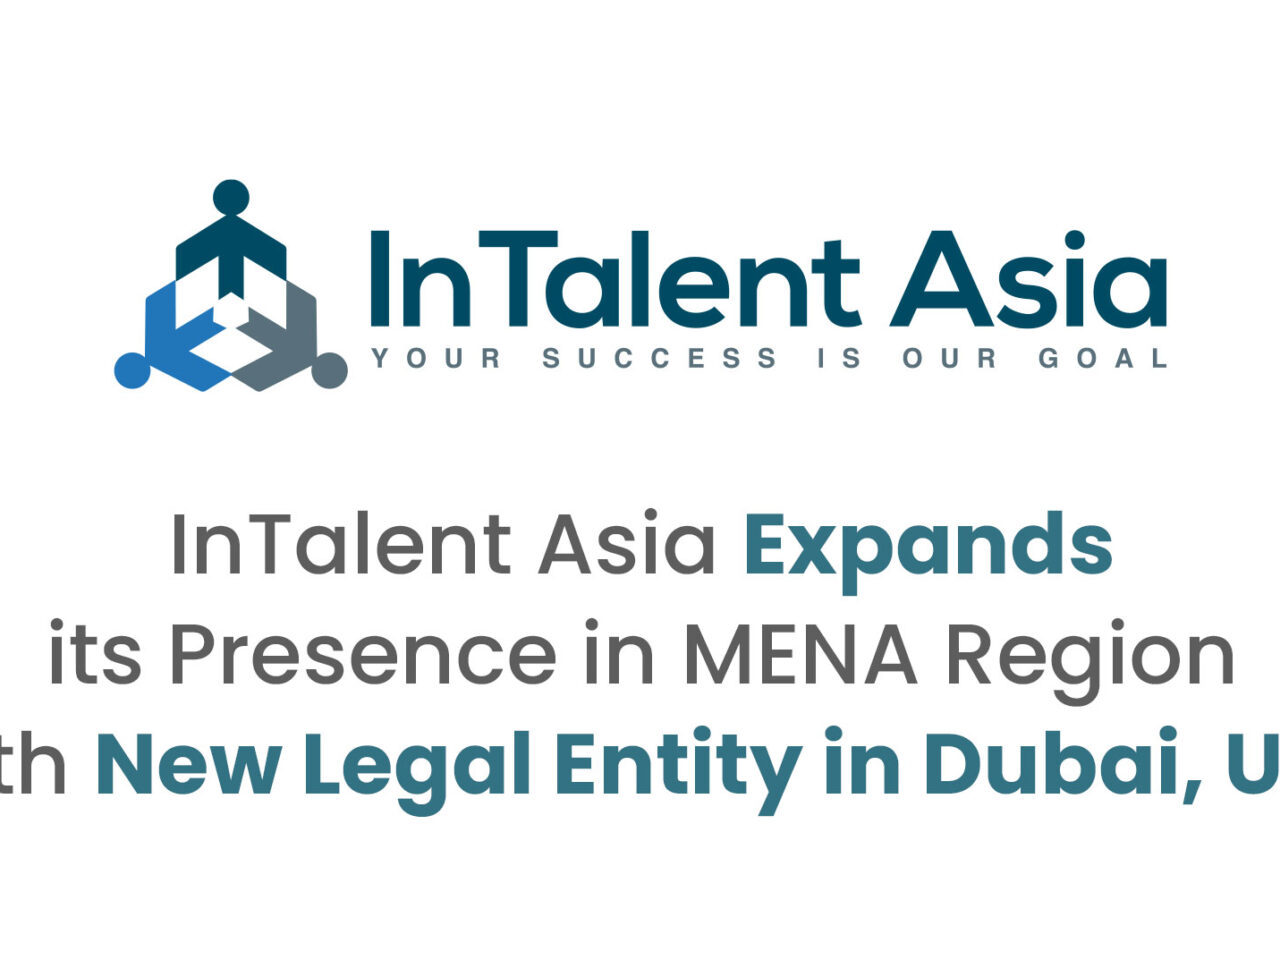 InTalent Asia Expands its Presence in MENA Region with New Legal Entity in Dubai, UAE